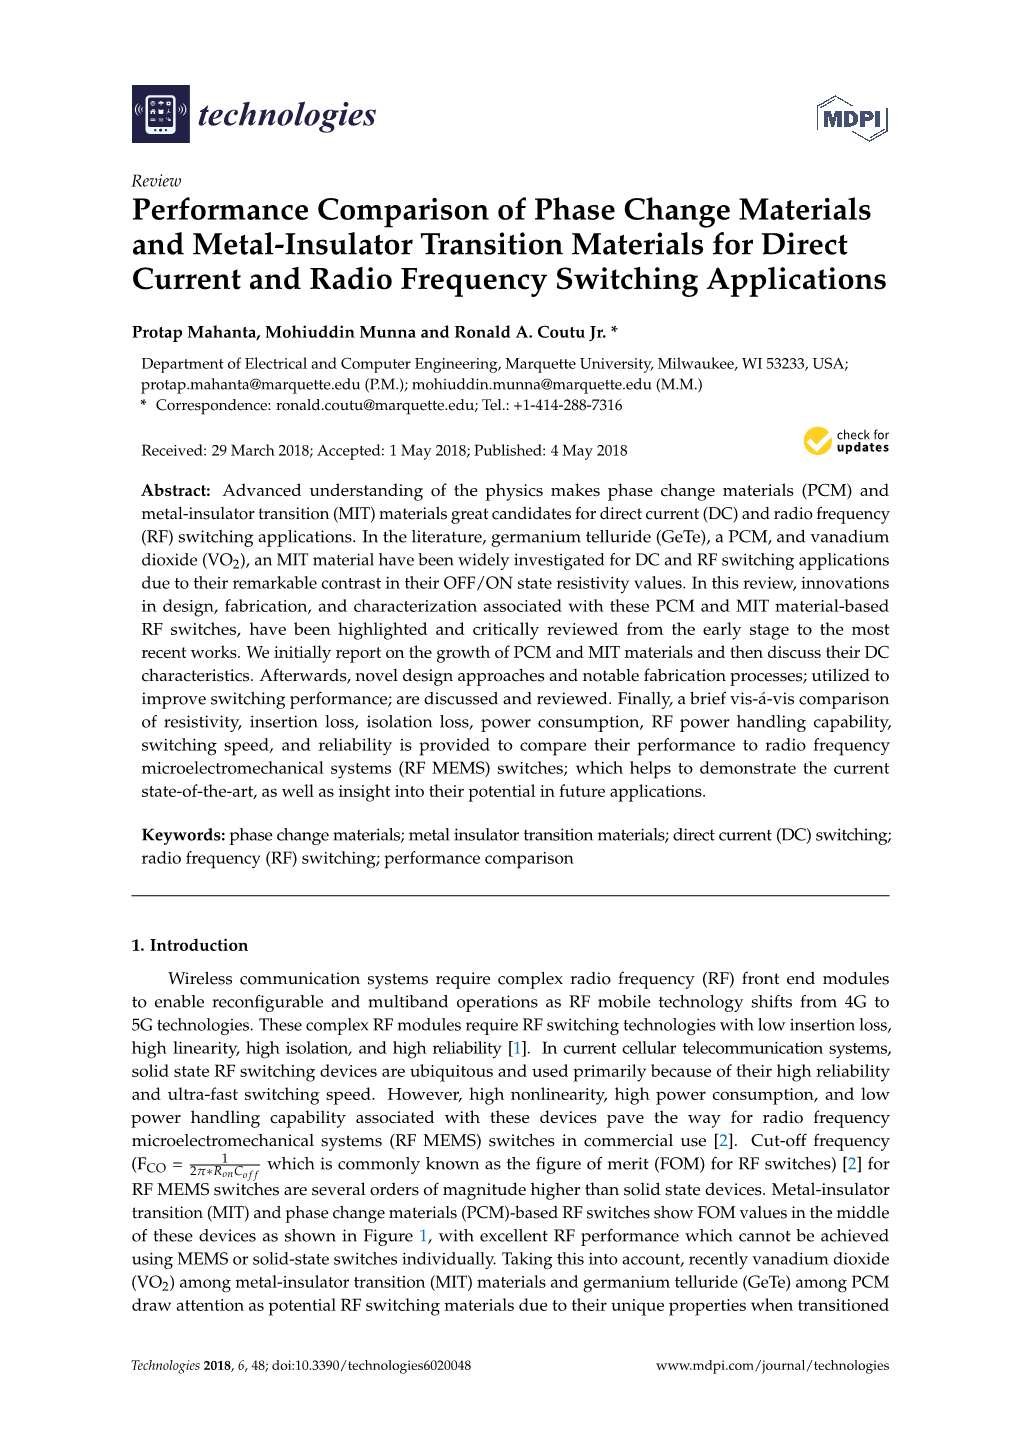 Performance Comparison of Phase Change Materials and Metal-Insulator Transition Materials for Direct Current and Radio Frequency Switching Applications